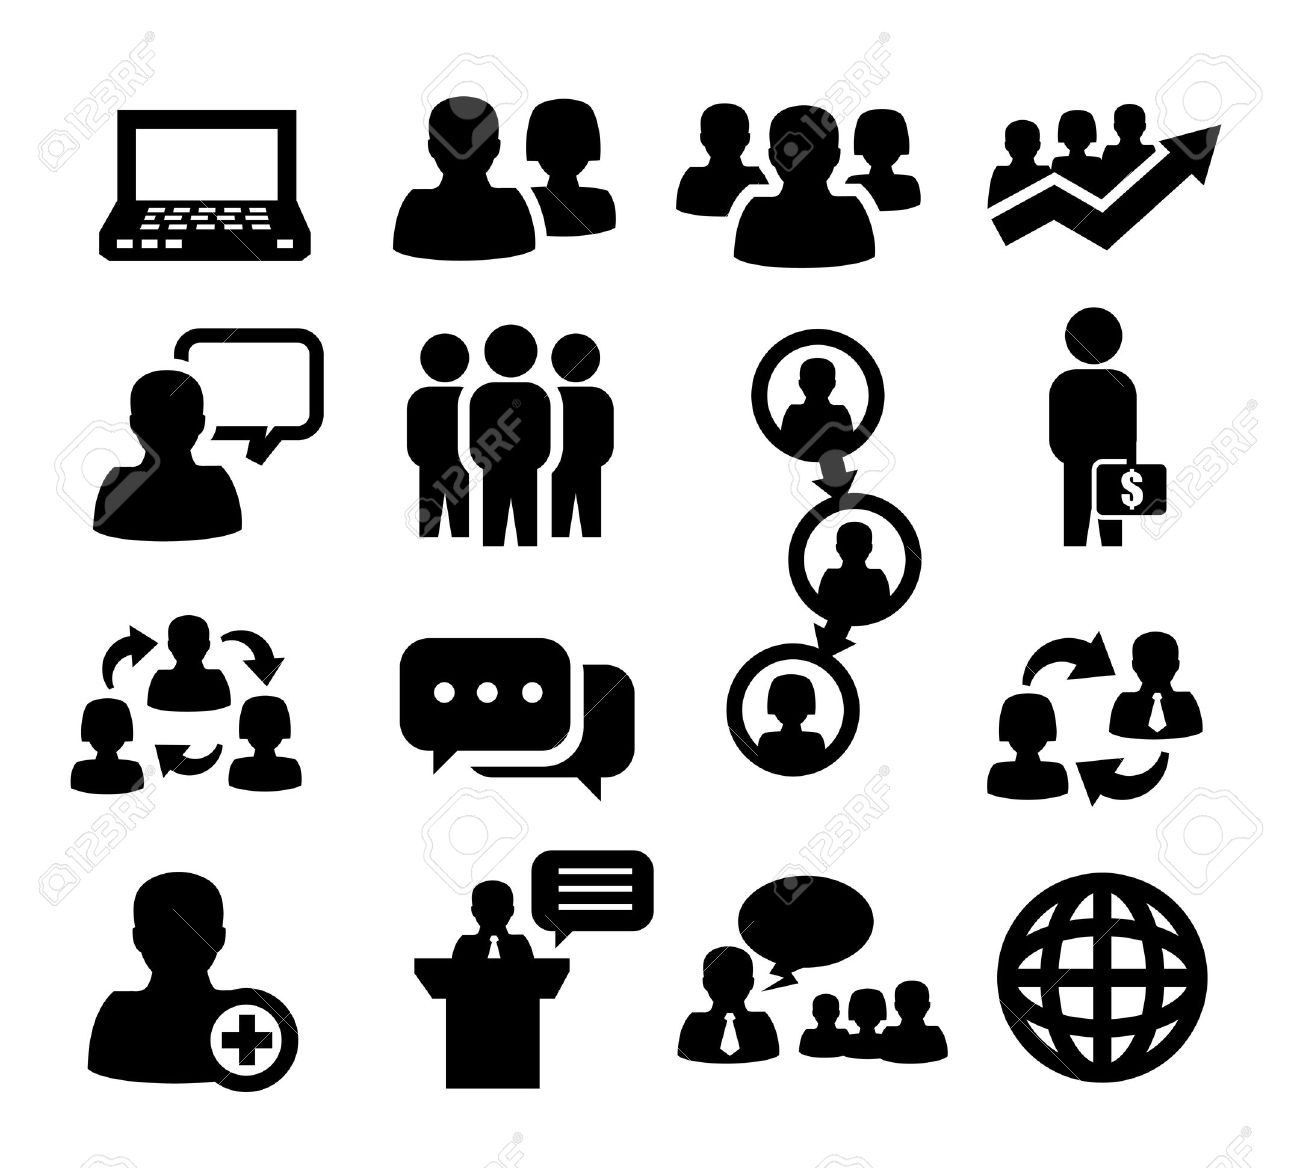 Group of people in a formation - Free people icons